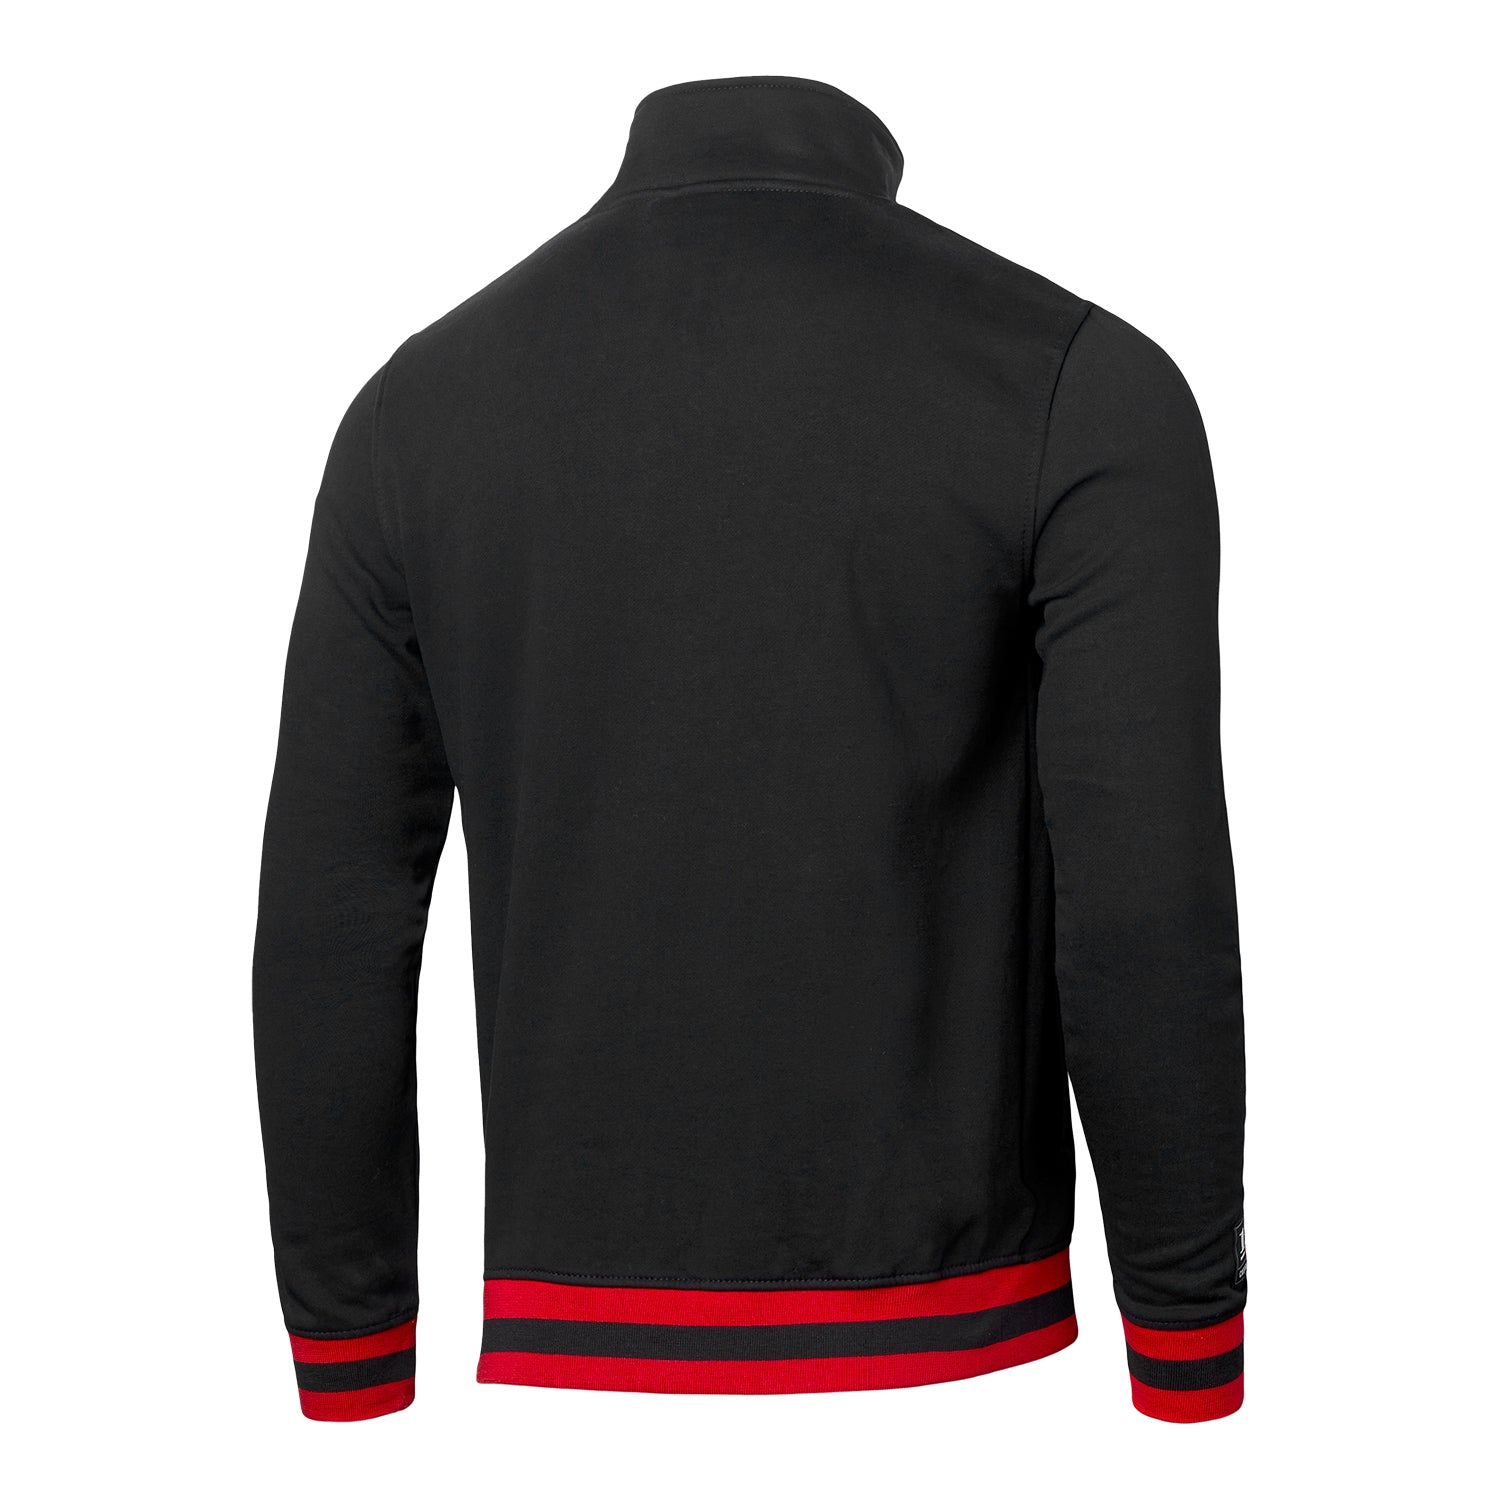 Chicago Bulls 1966 City Edition Zip Jacket - back view